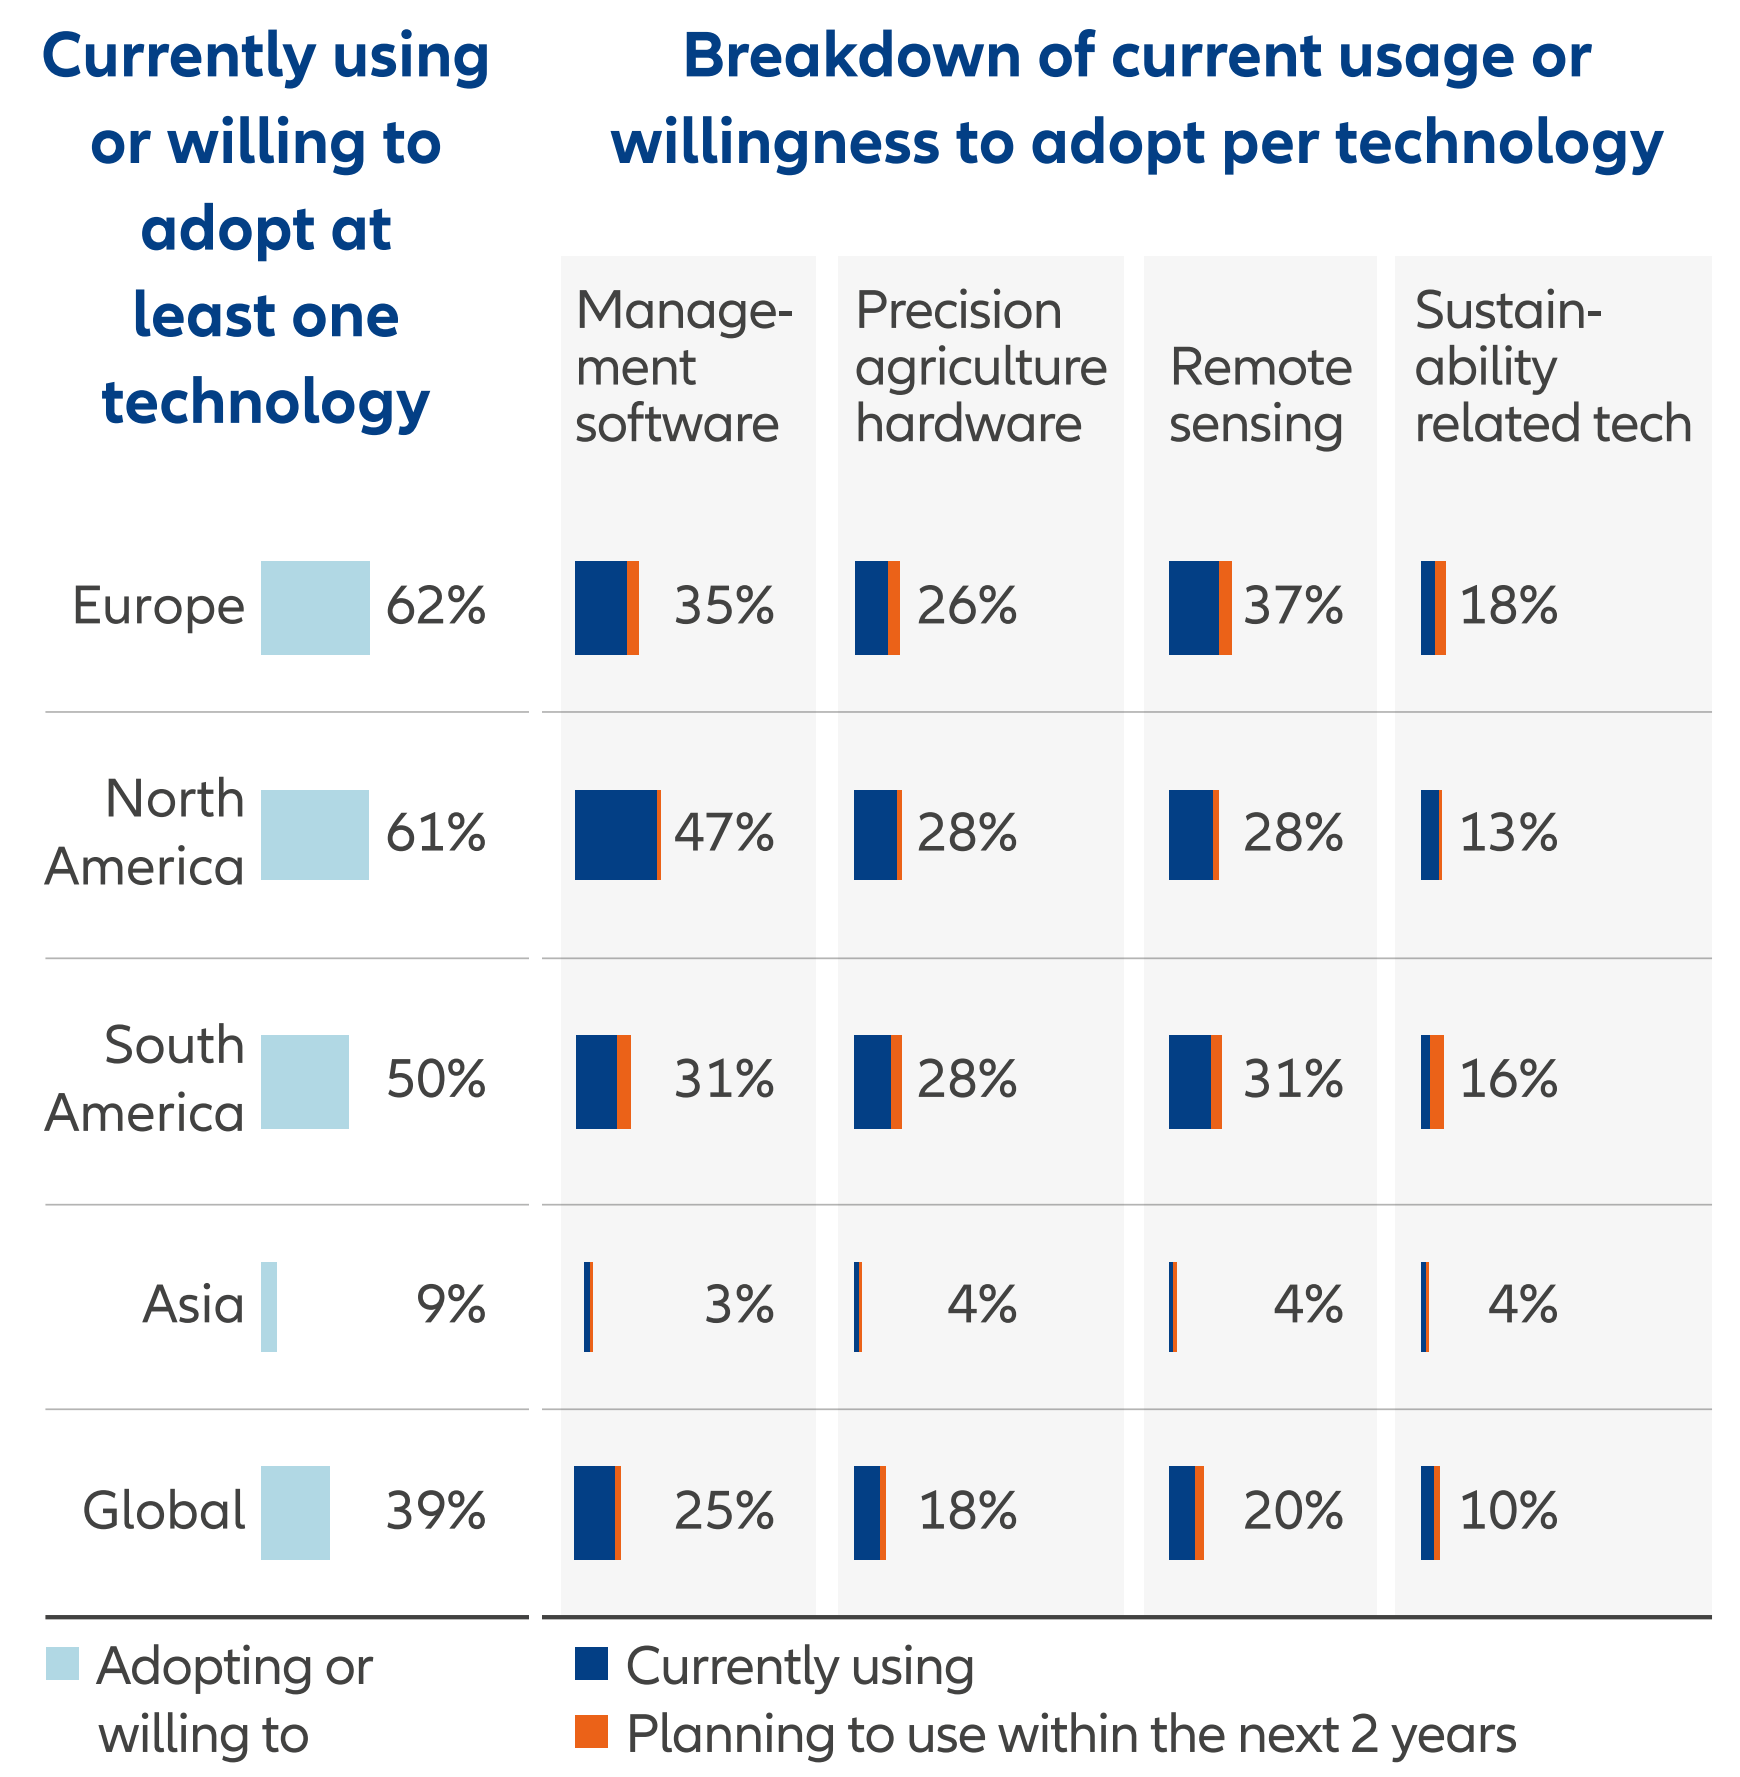 Farming technologies adoption and willingness to adopt